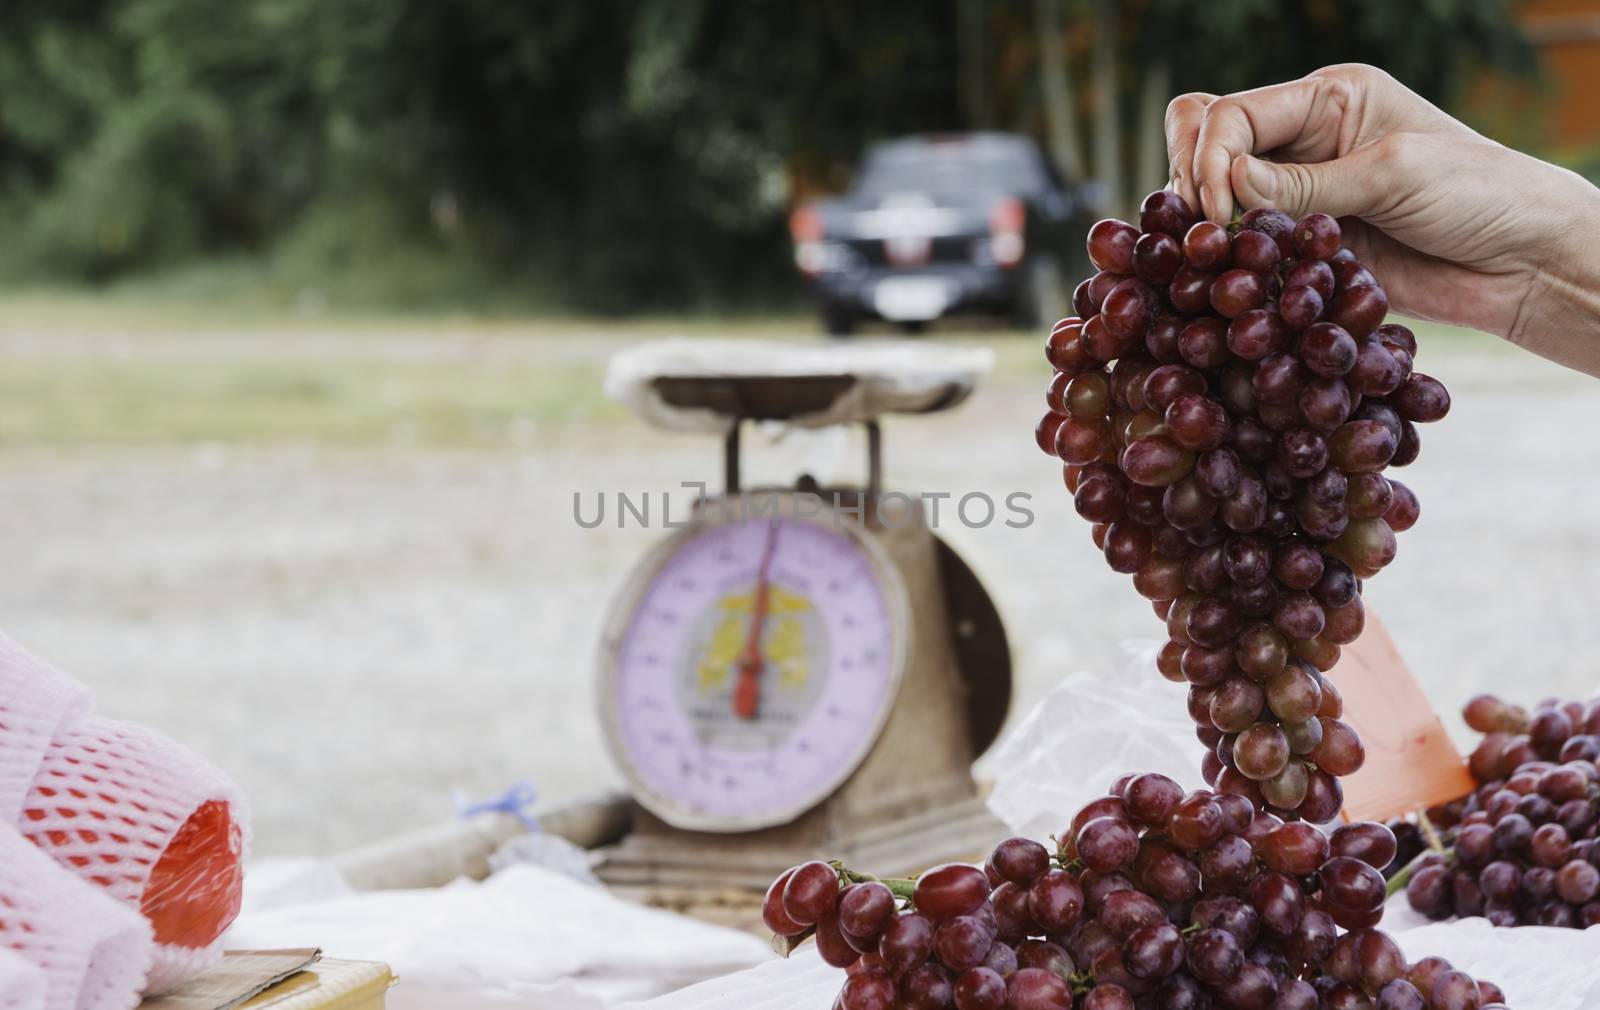 Young woman choosing grape at supermarket. Healthy and lifestyle concept.